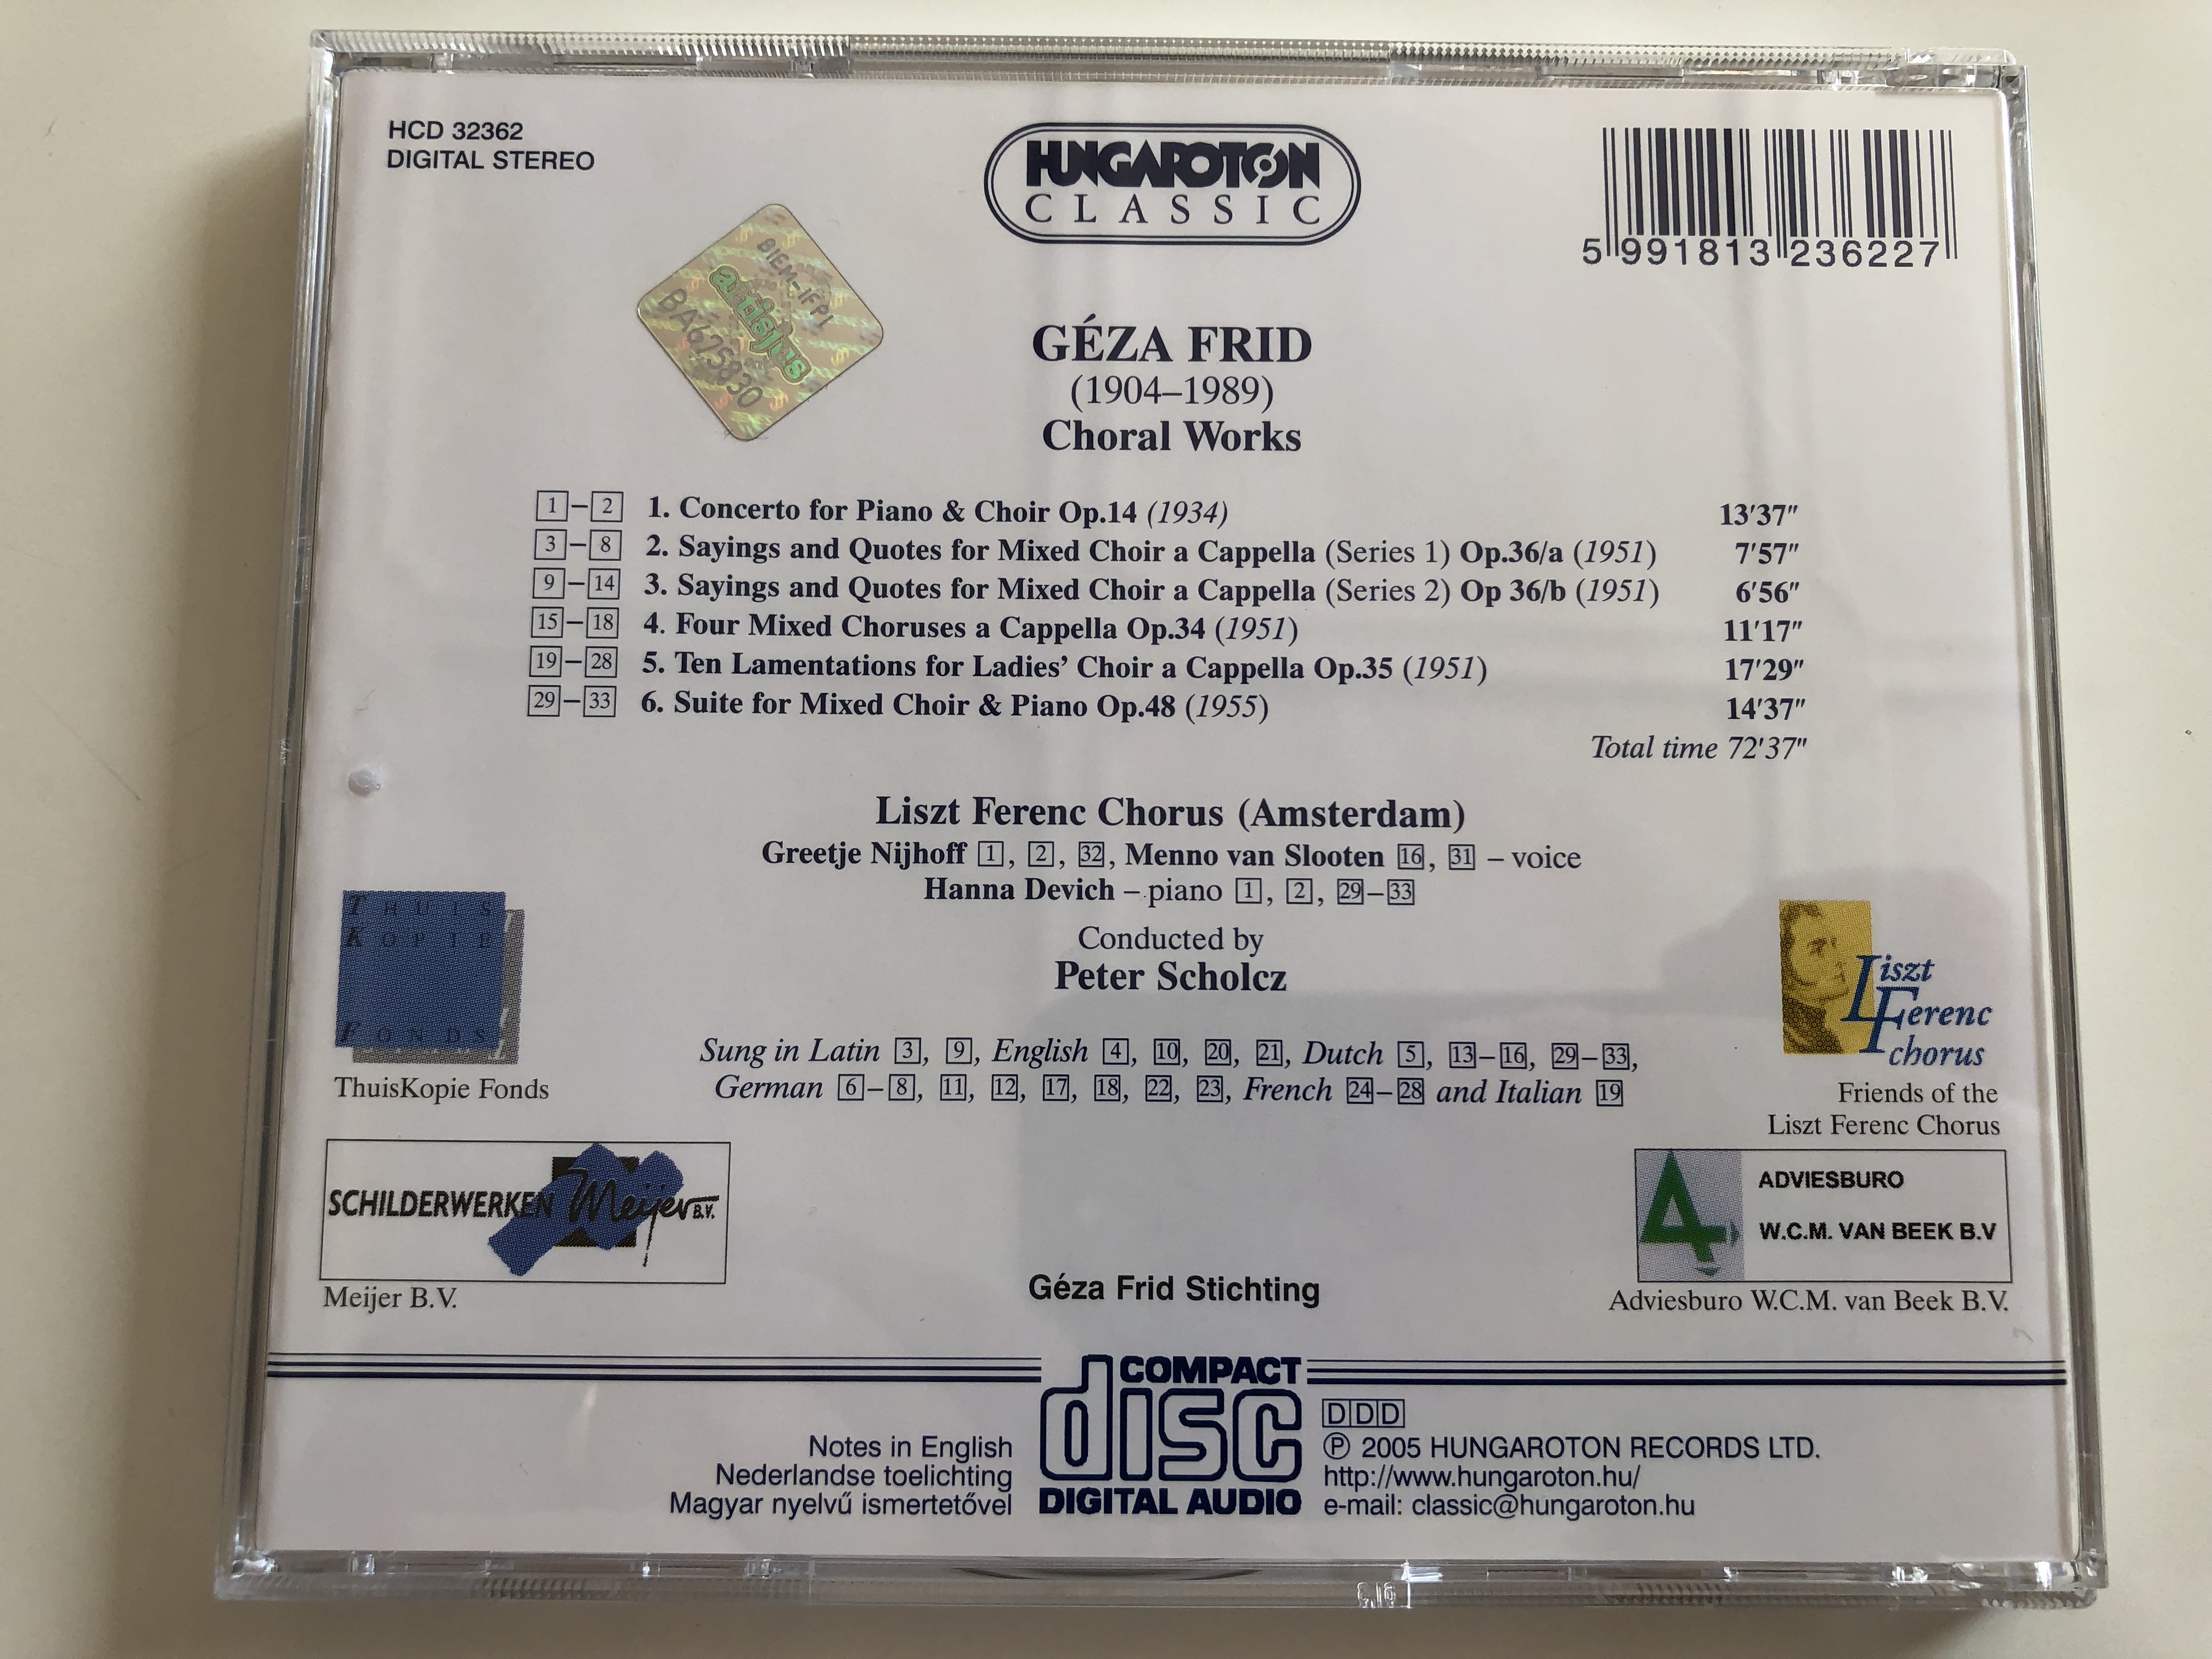 g-za-frid-choral-works-liszt-ferenc-chorus-amsterdam-hanna-devich-piano-conducted-by-peter-scholcz-hungaroton-classic-audio-cd-2005-hcd-32362-12-.jpg